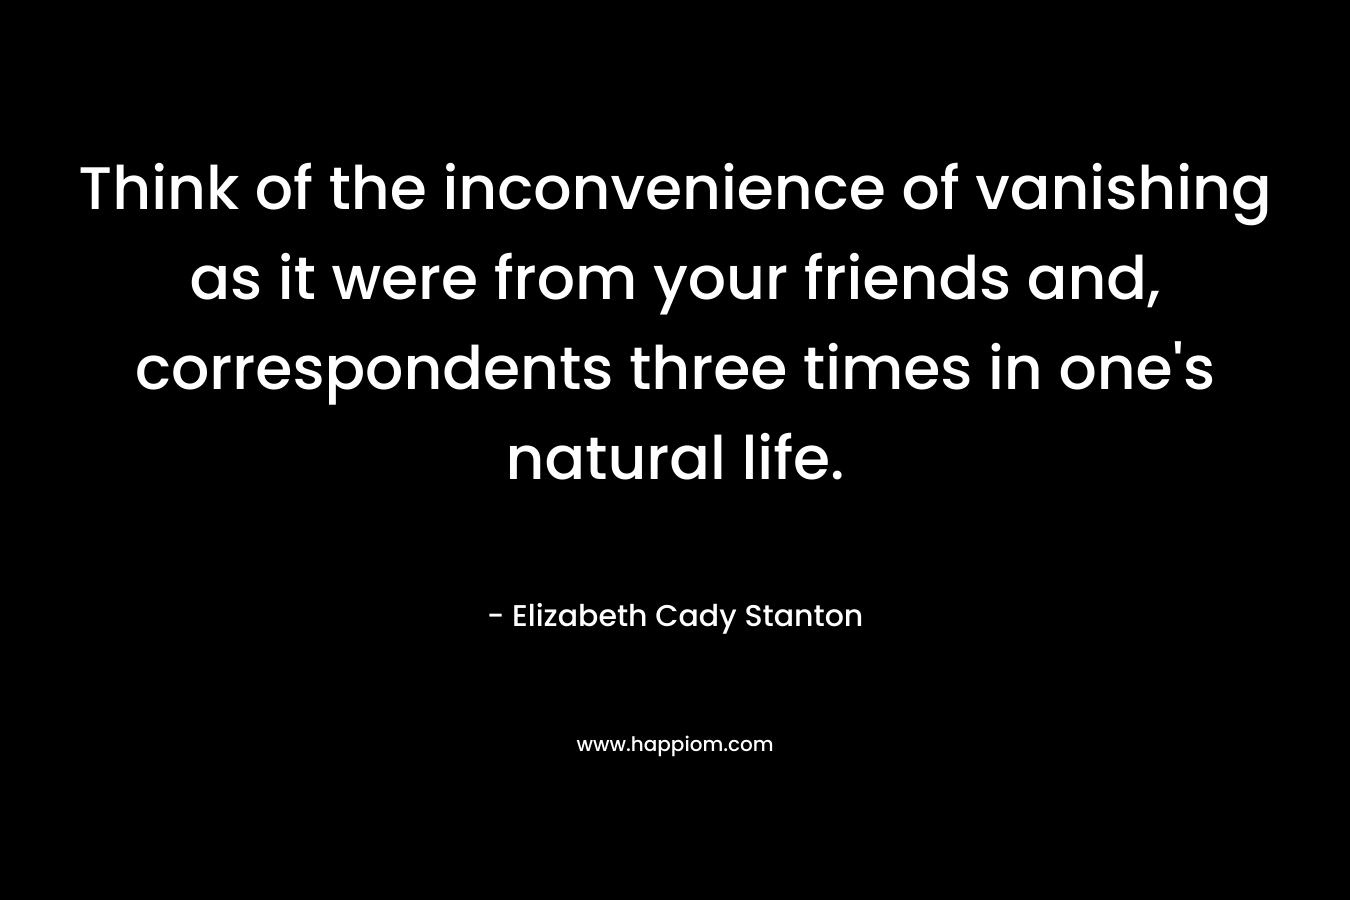 Think of the inconvenience of vanishing as it were from your friends and, correspondents three times in one’s natural life. – Elizabeth Cady Stanton